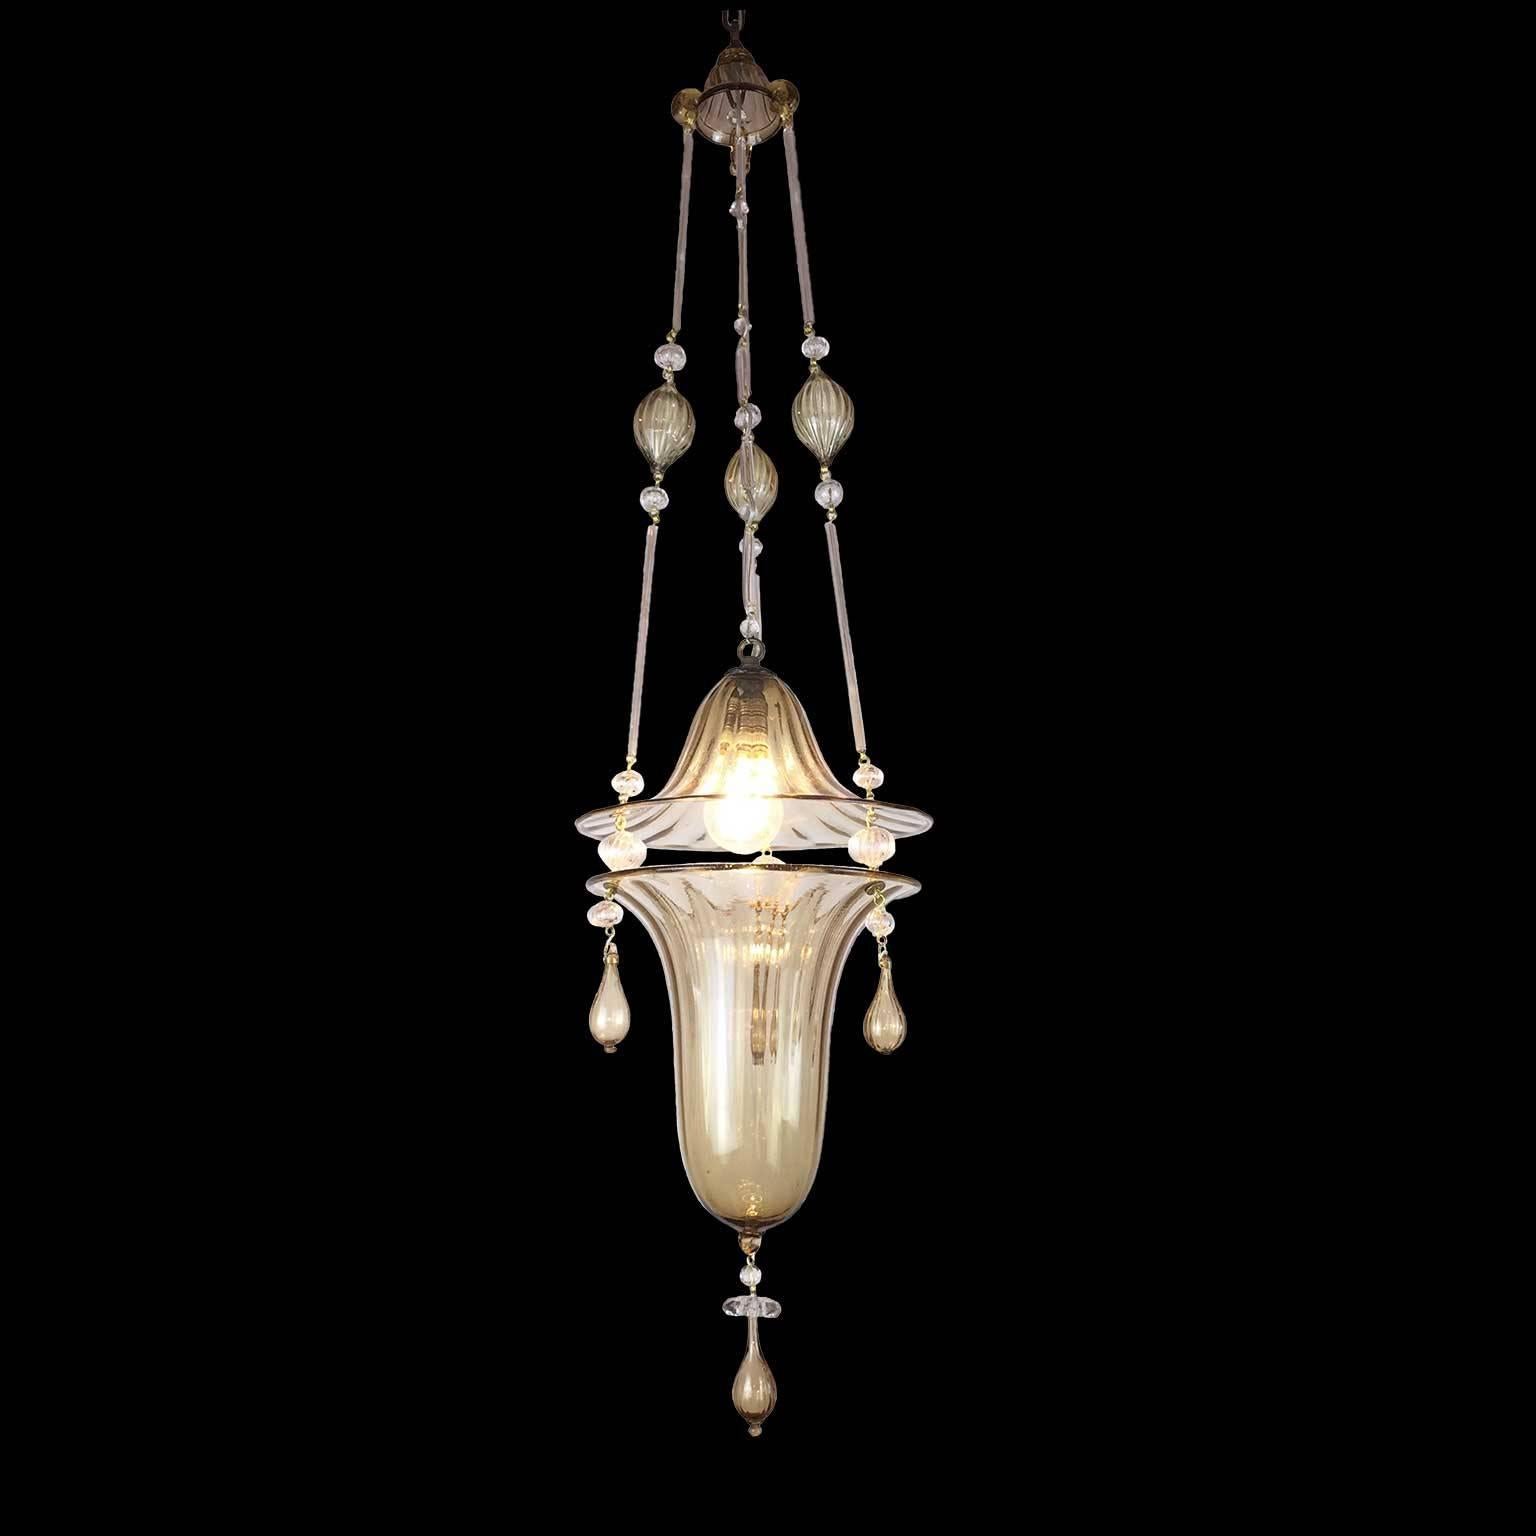 Antique Venetian Murano amber blown glass one-light pendant dating back to the first half 1900, this elegant vertical structure reminds an earliest antique oil lantern.
In good condition, except a light felure in the first upper bowl, see image